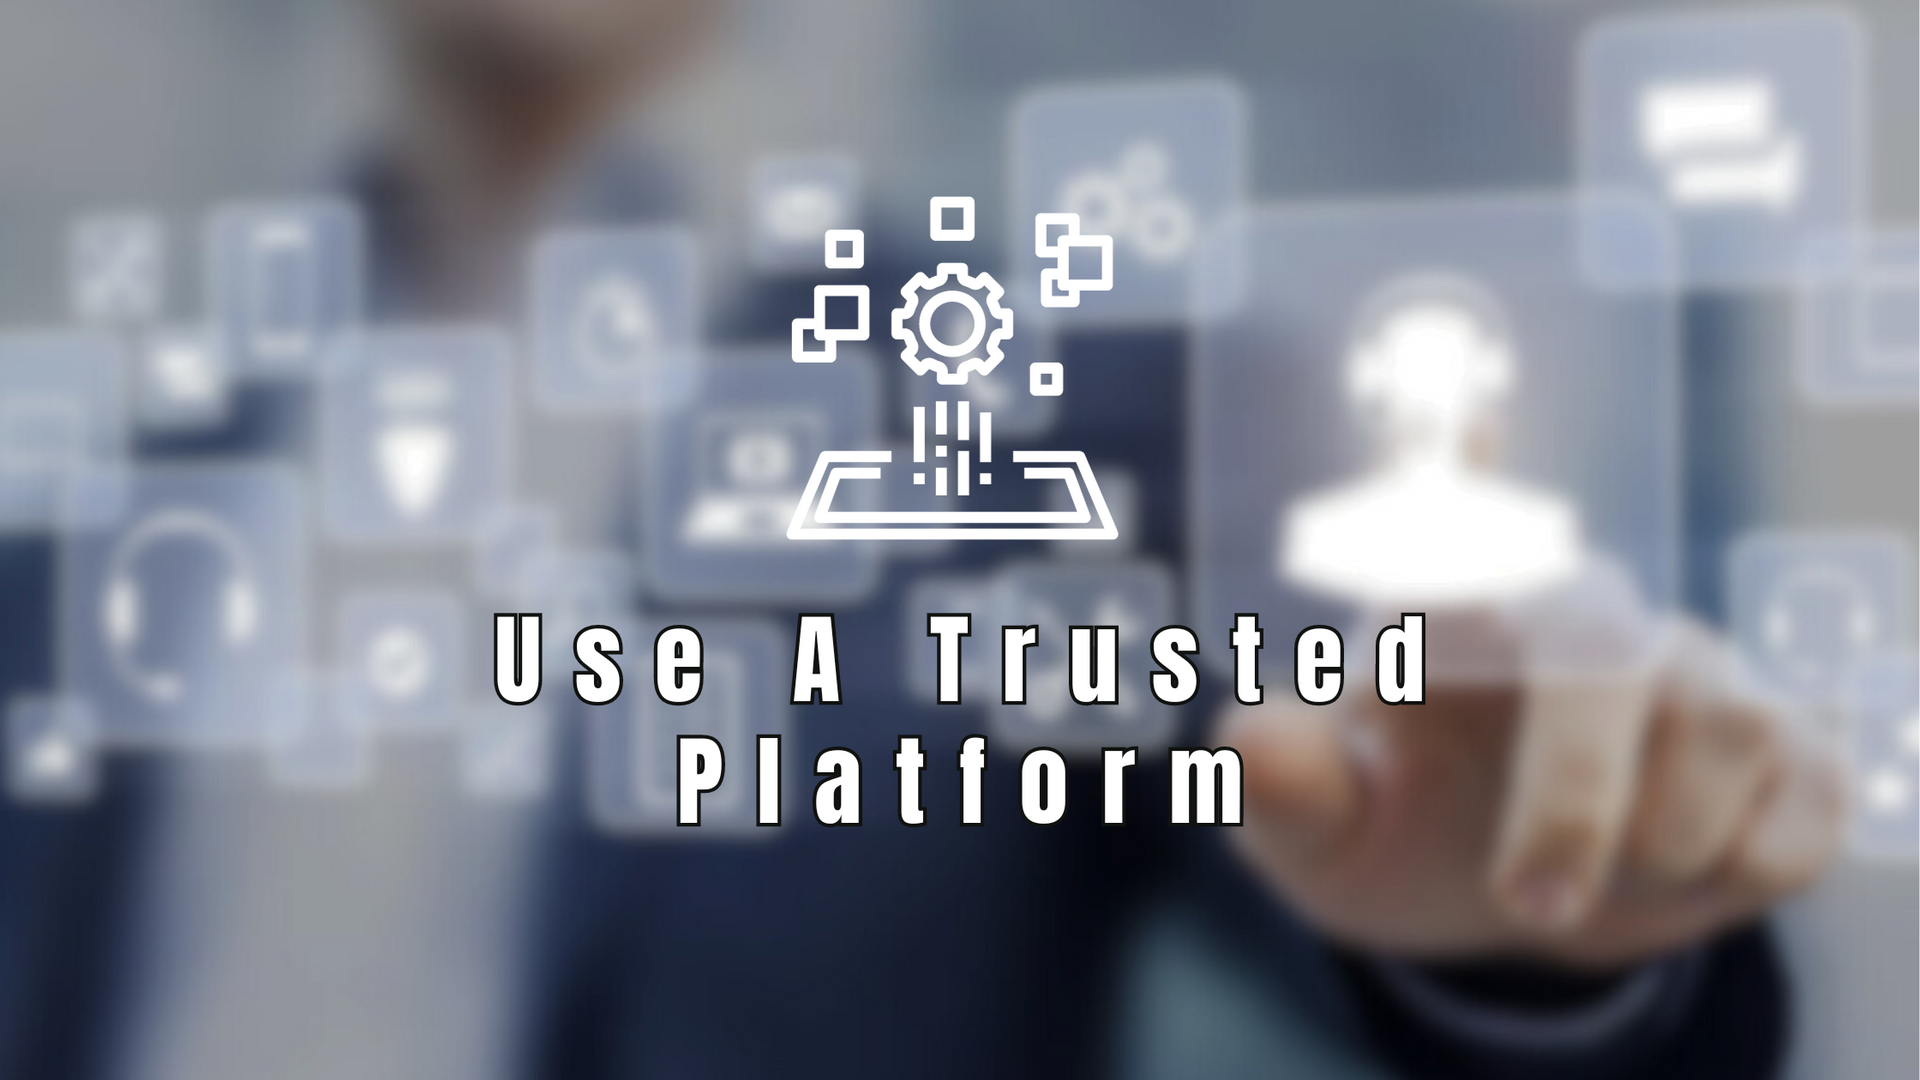 Step 5: Leveraging a Trusted Platform for Transactions and Security